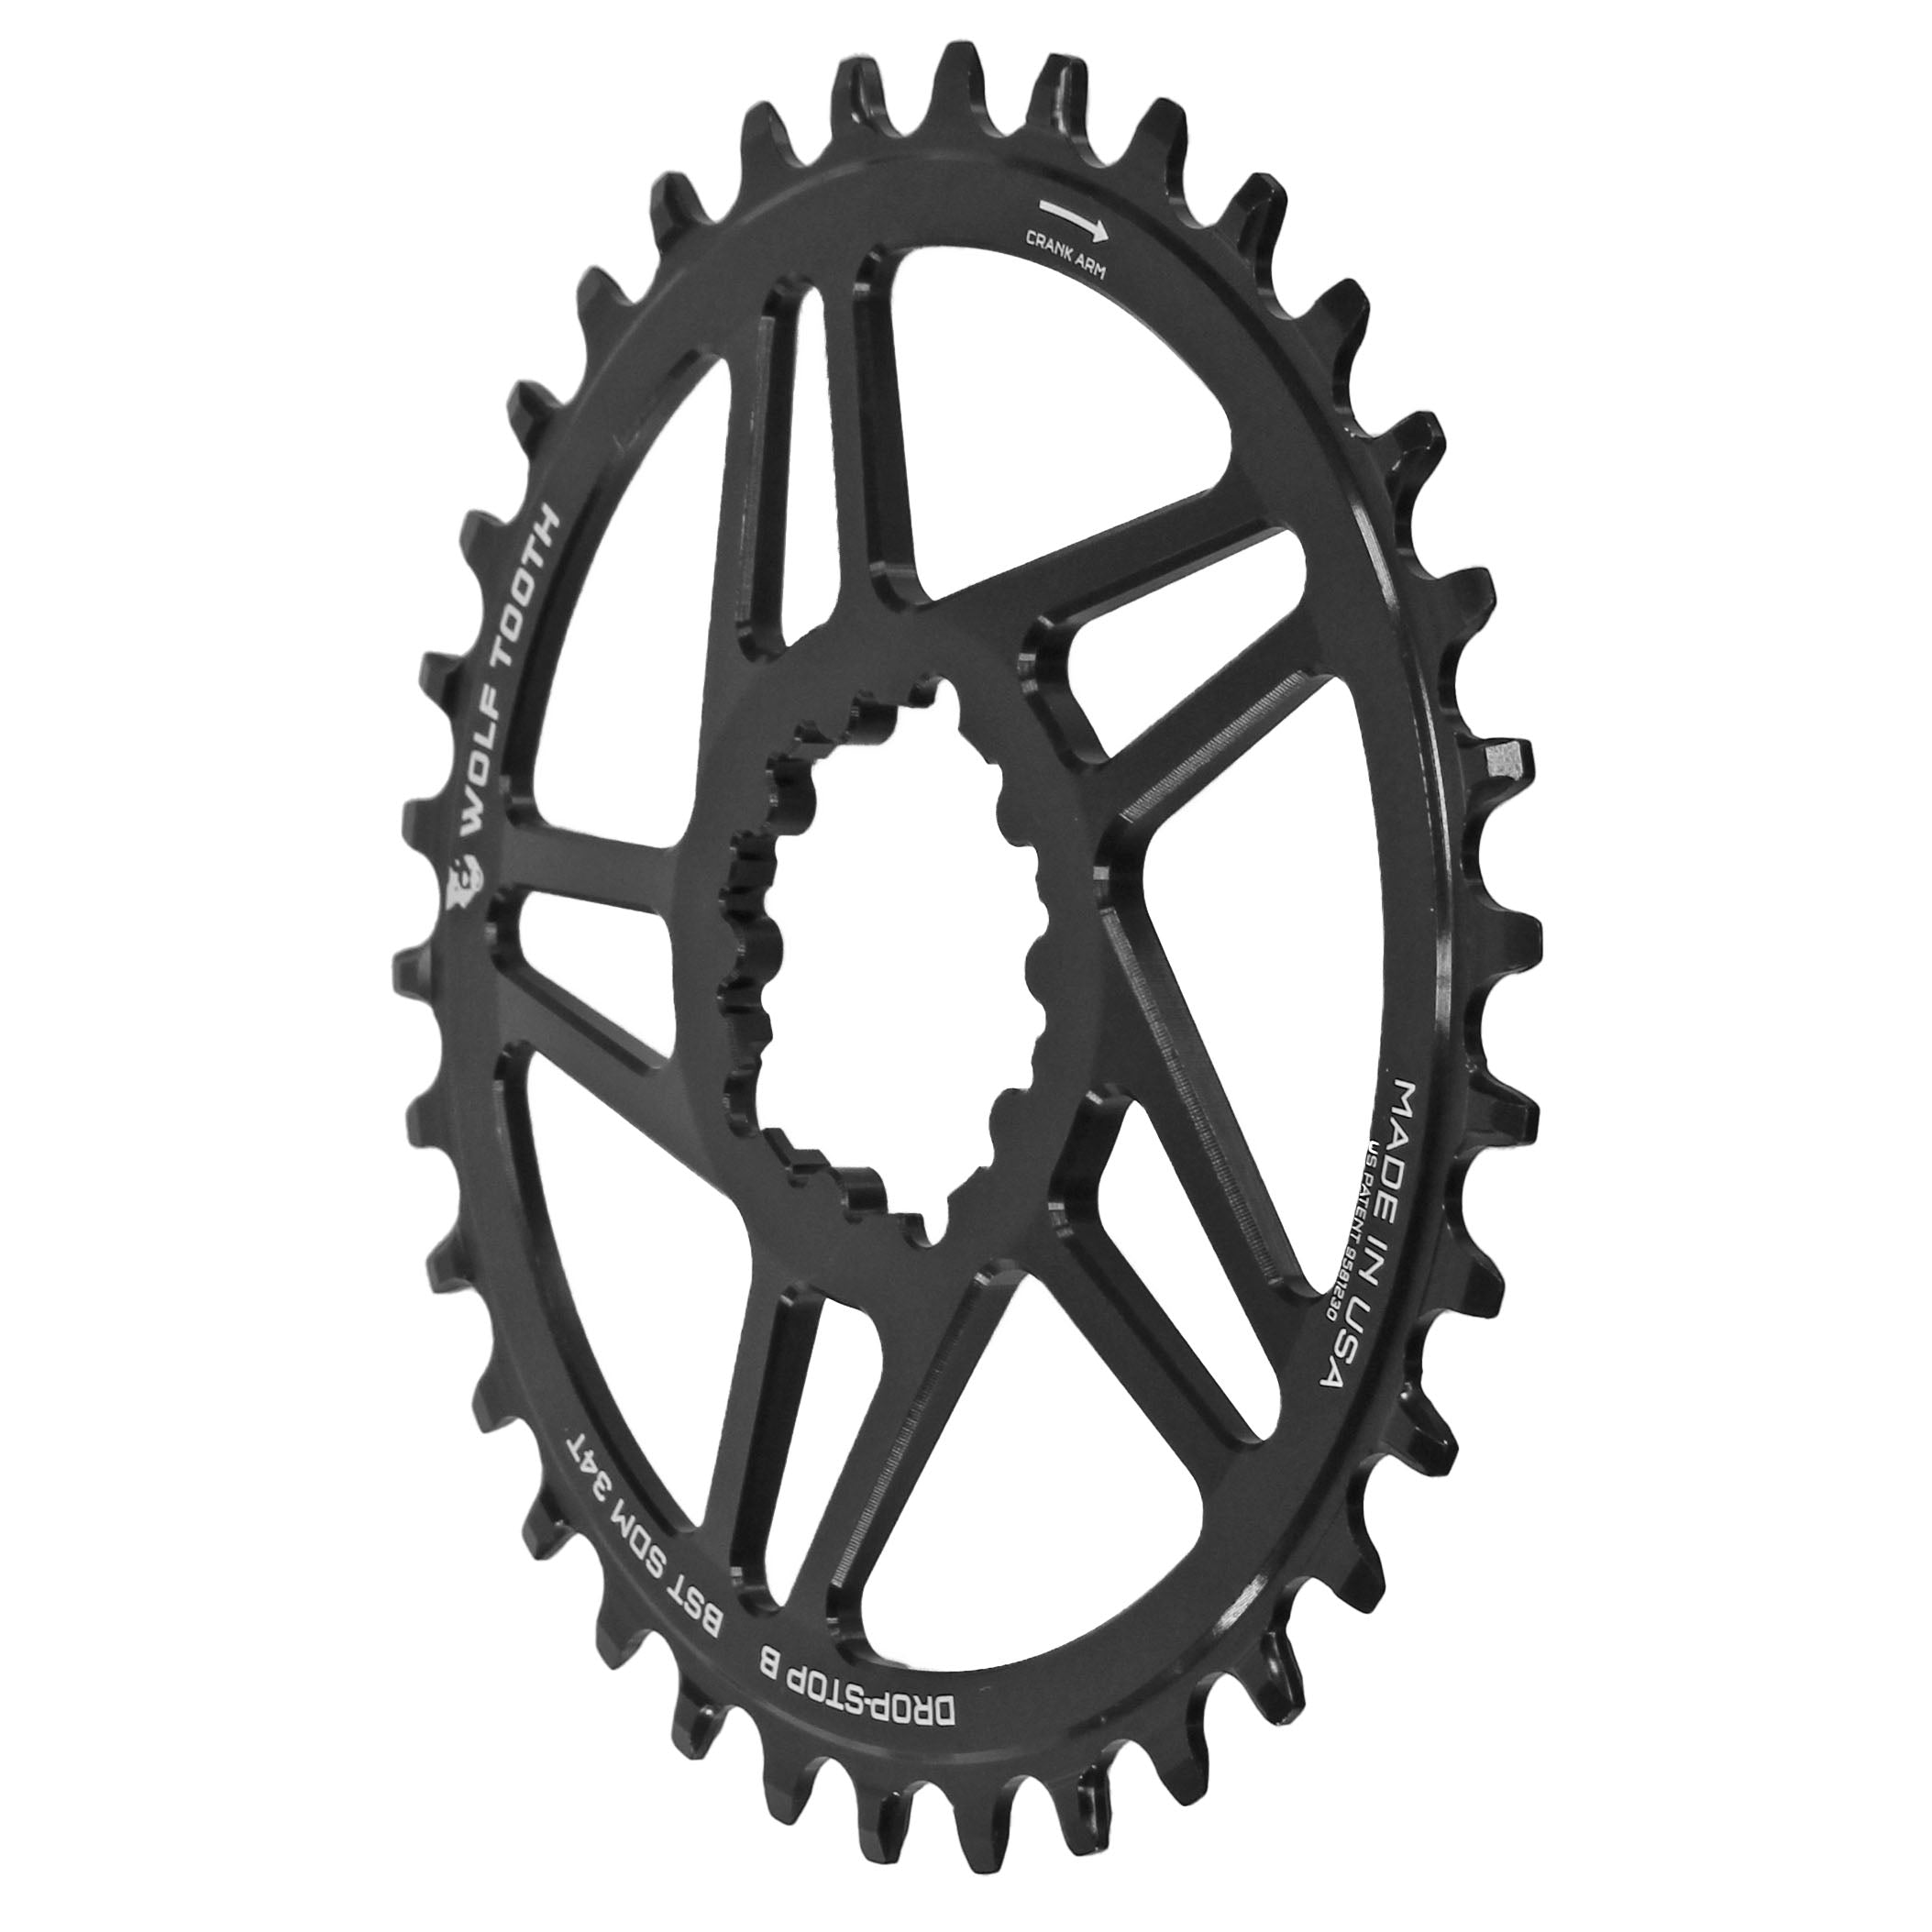 Wolf Tooth Direct Mount Chainring - 28t SRAM Direct Mount Drop-Stop B For SRAM 3-Bolt Boost Cranks 3mm Offset BLK